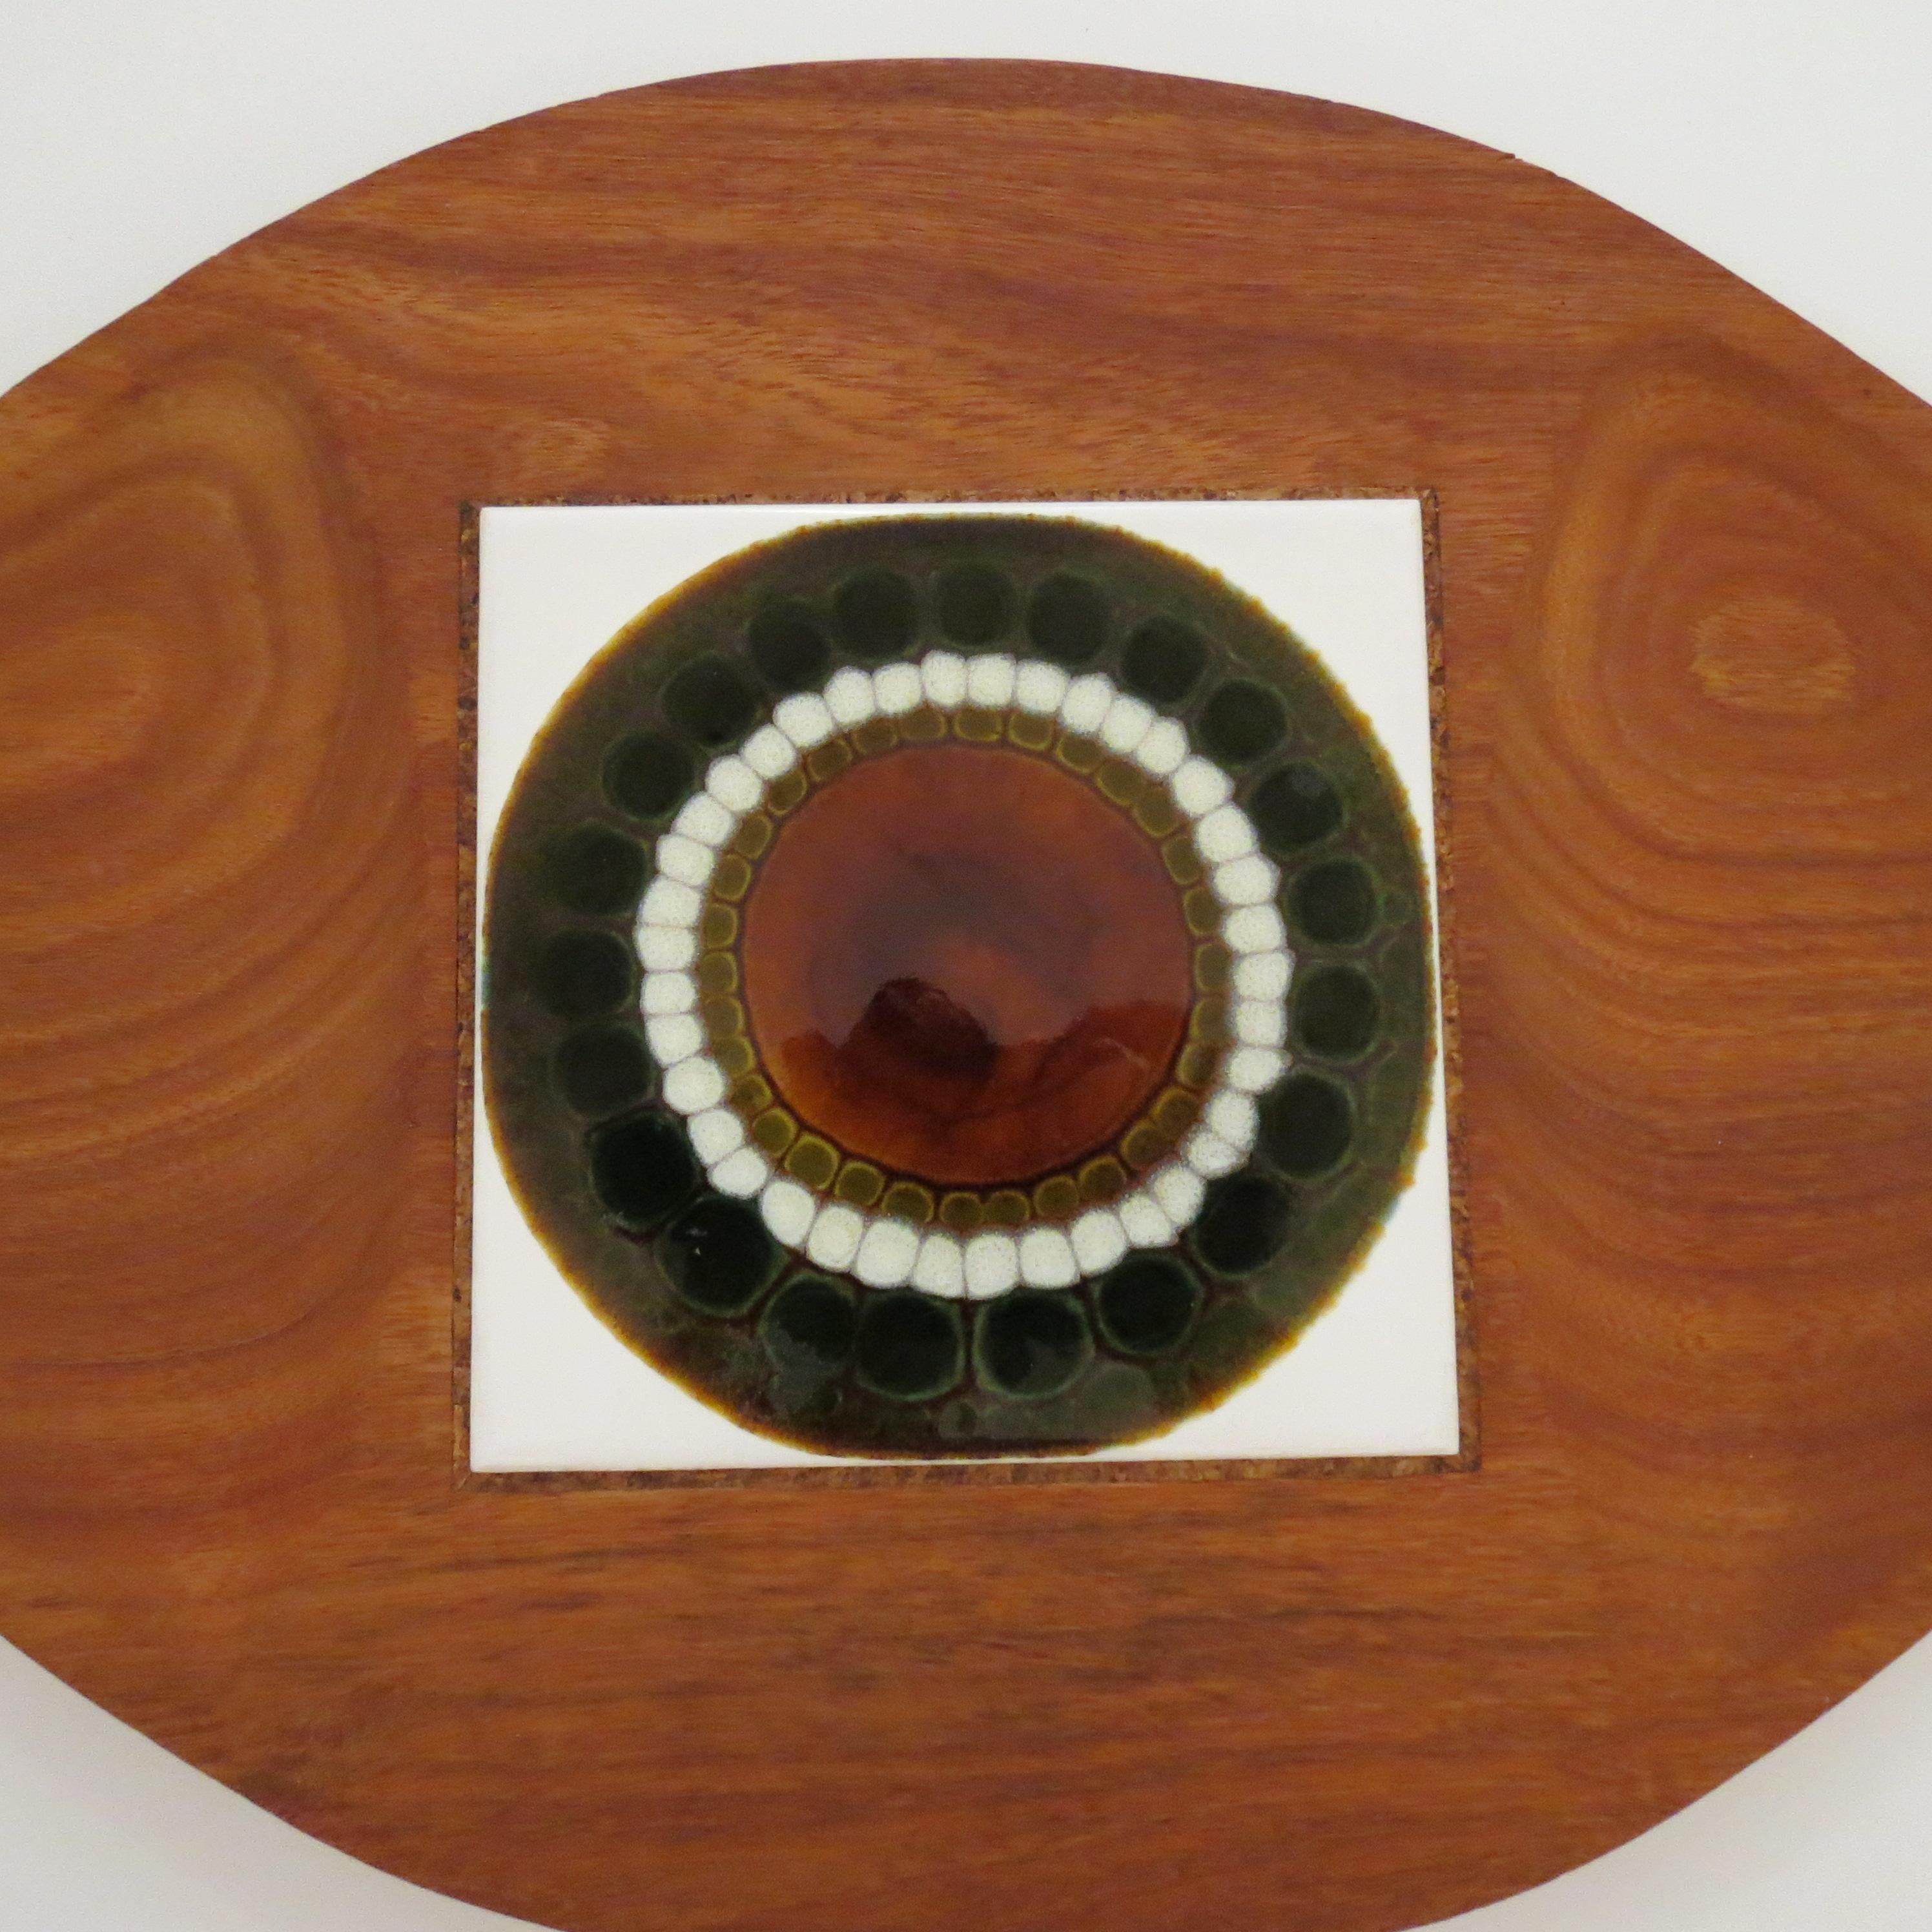 Mid-Century Modern Midcentury Teak Tray With Tile Insert By Allan Wallwork 1970 For Sale